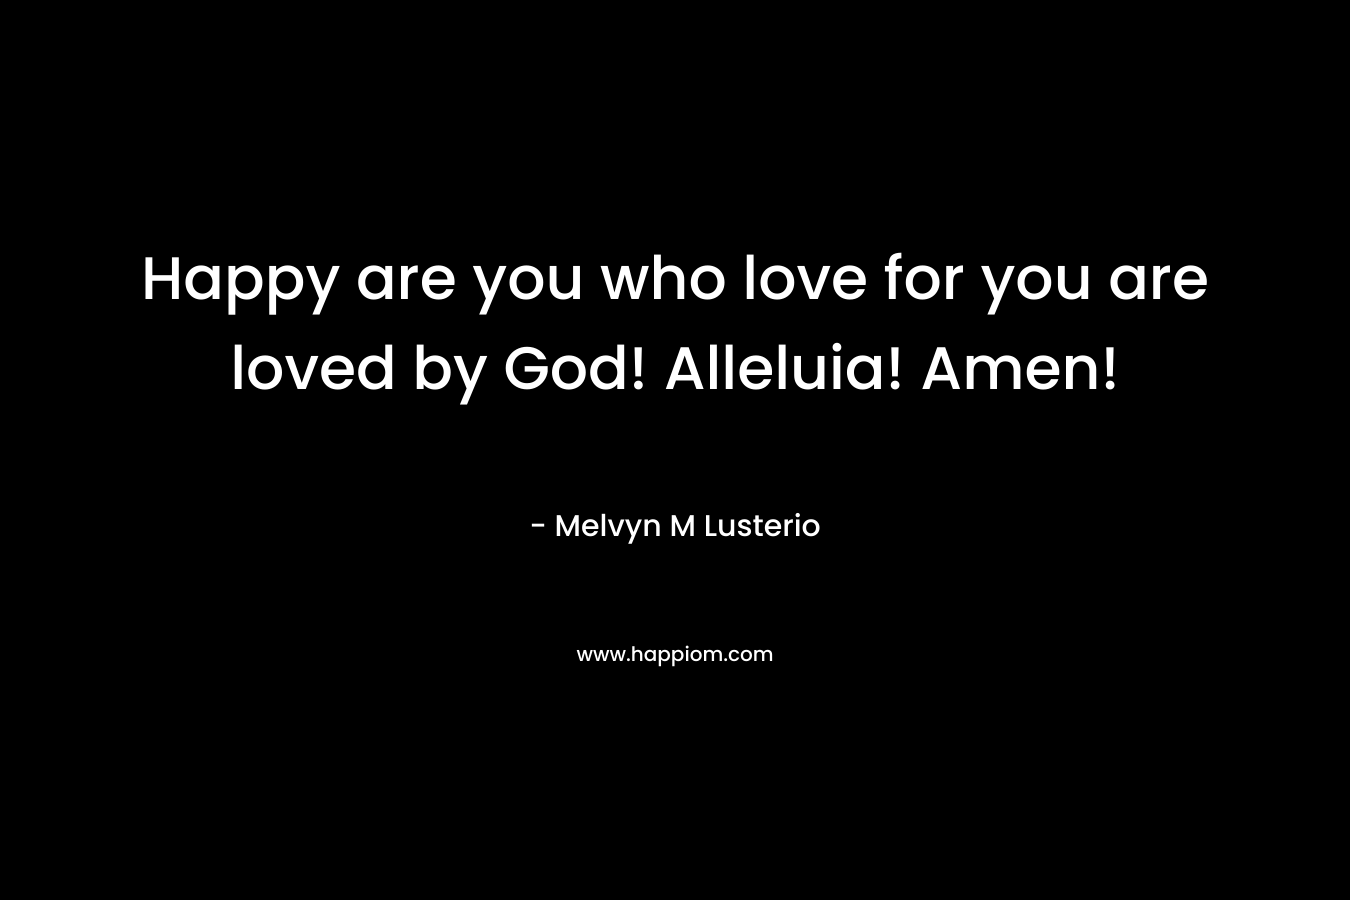 Happy are you who love for you are loved by God! Alleluia! Amen! – Melvyn M Lusterio